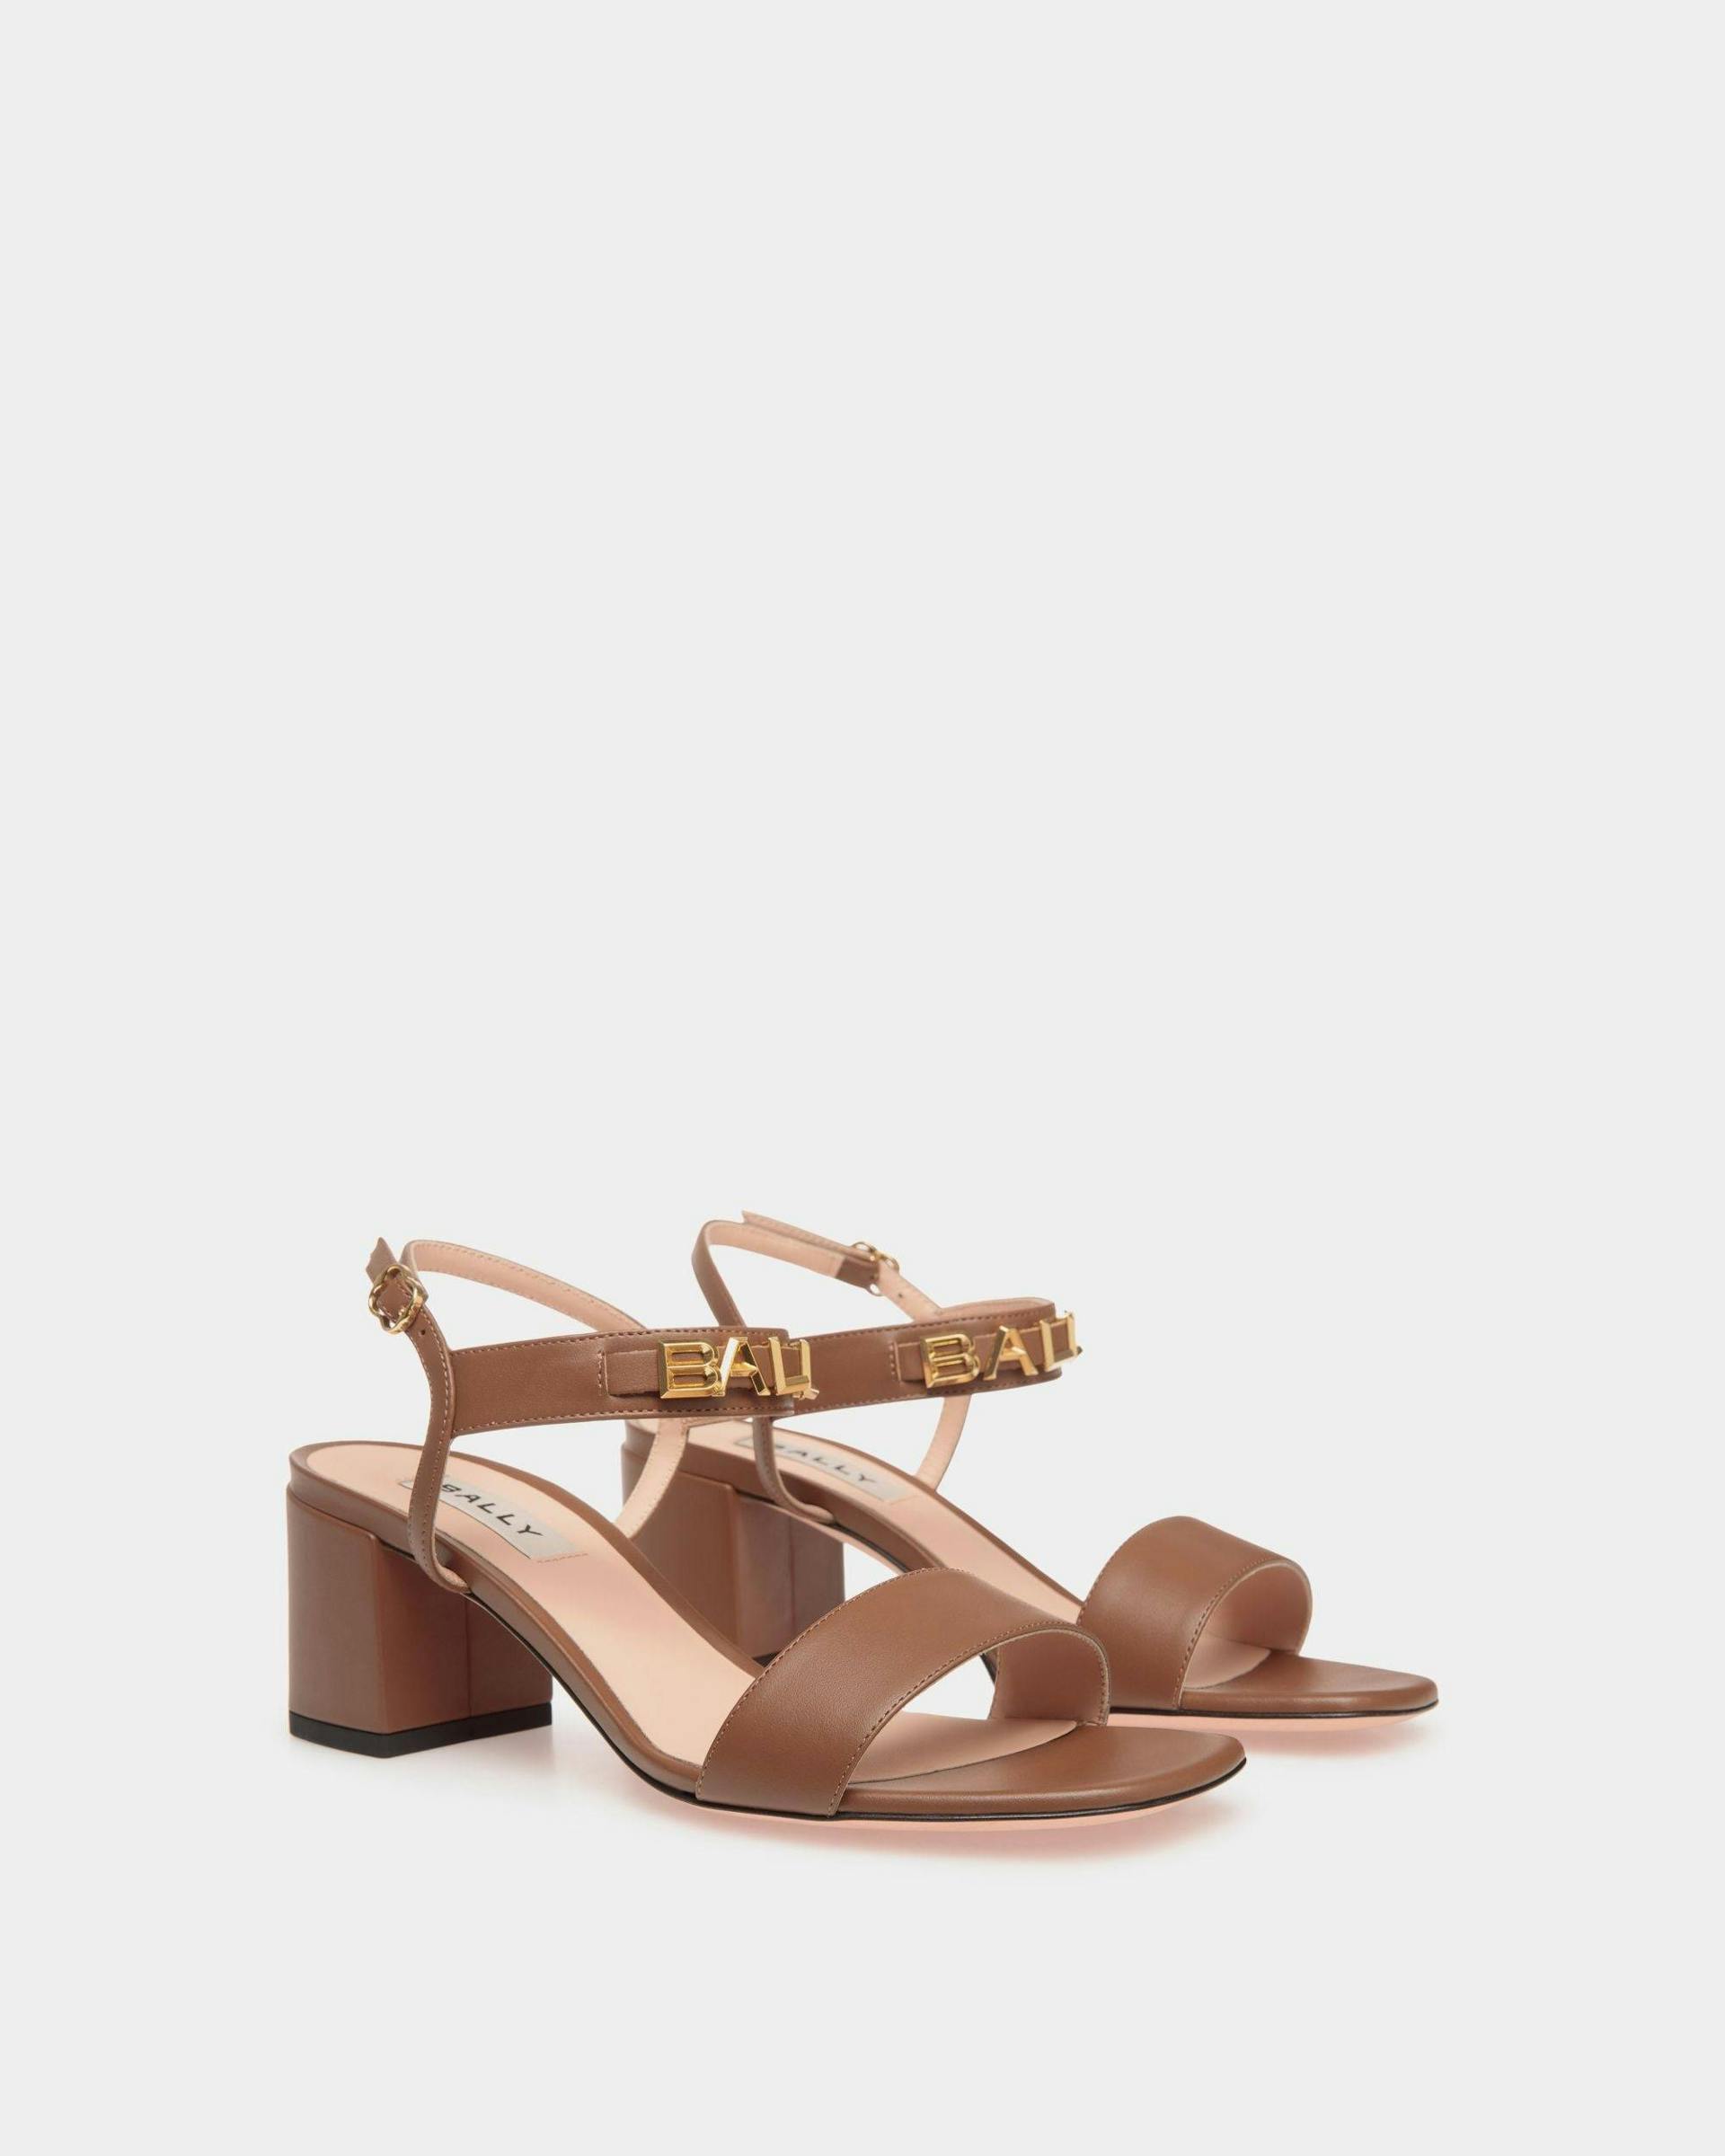 Women's Bally Spell Heeled Sandal in Leather | Bally | Still Life 3/4 Front